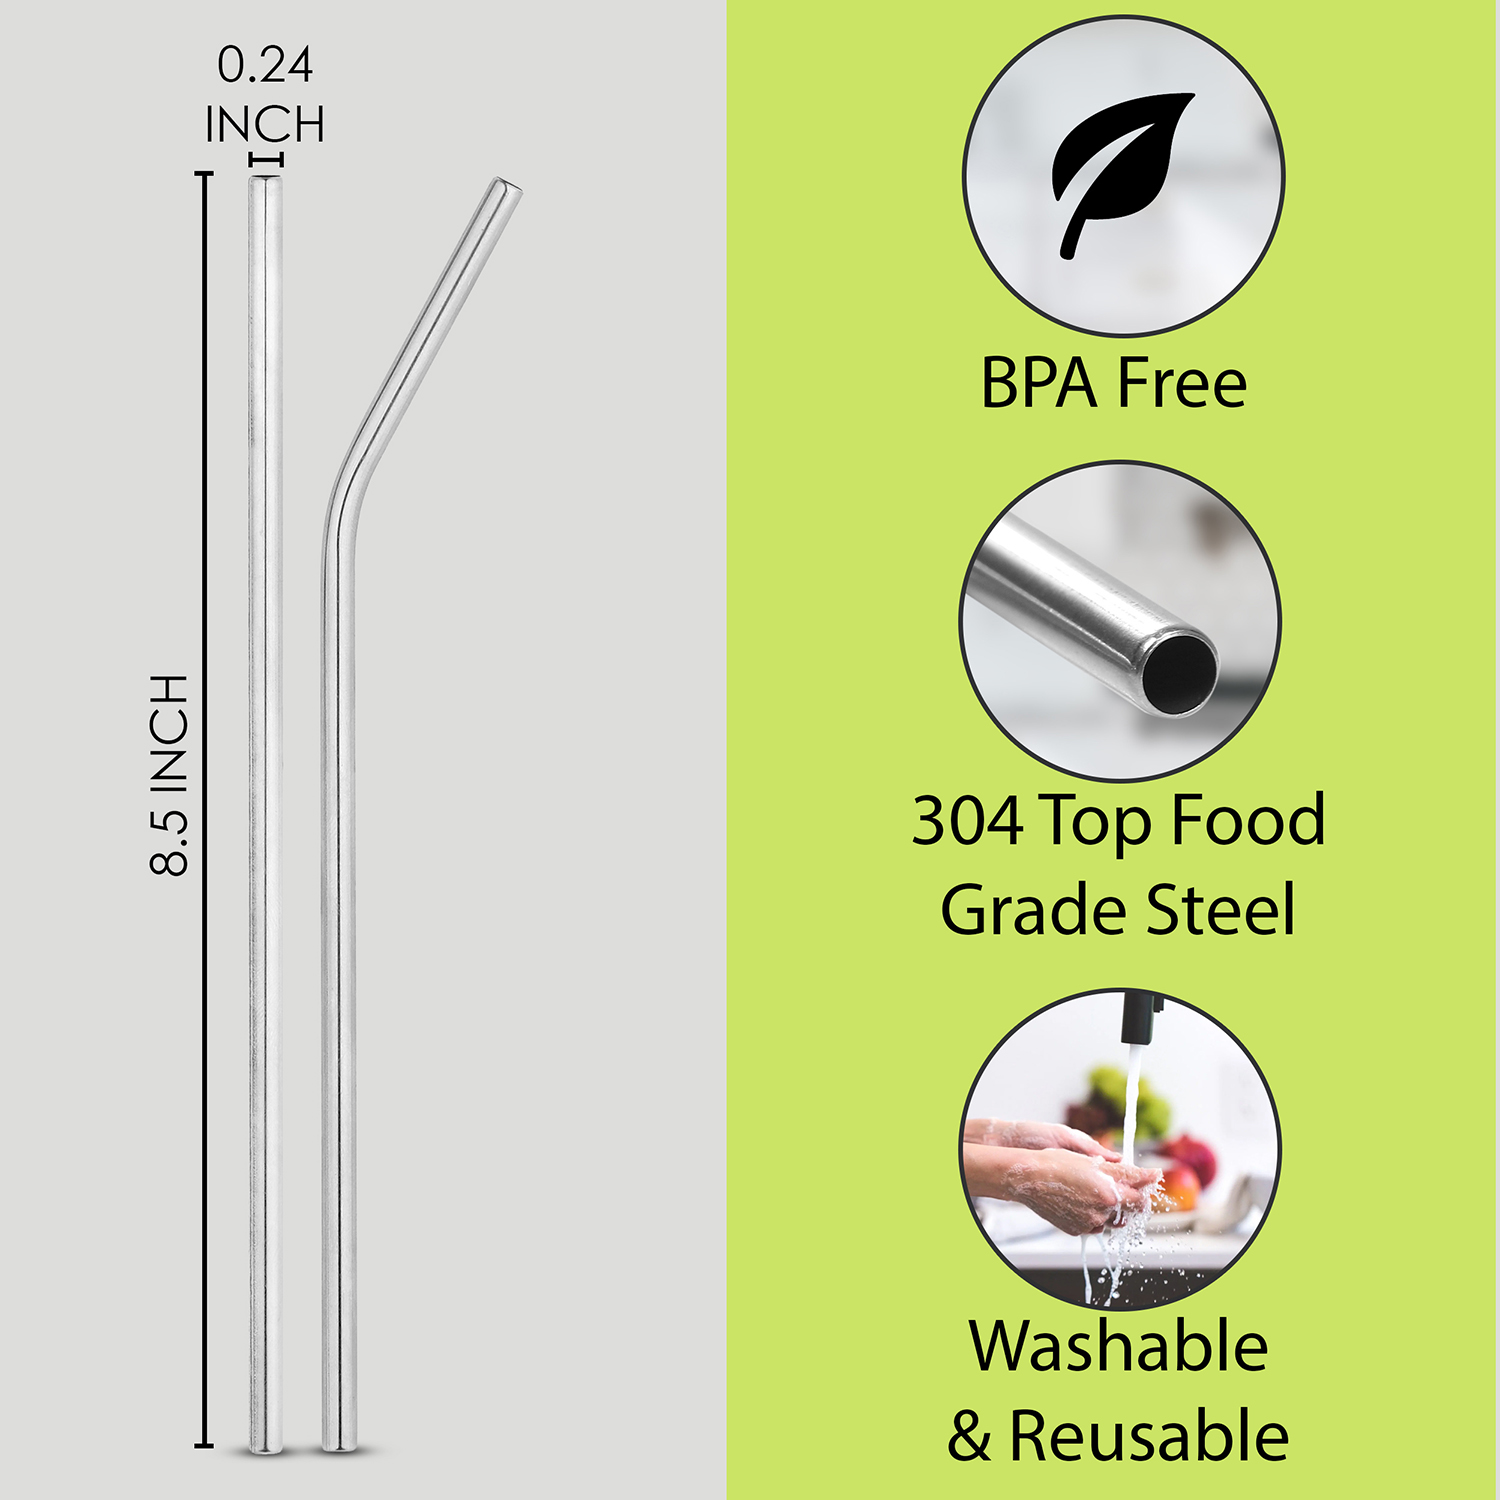 Practical Stainless Steel Drinking Straws Straight/Bent Reusable Washable Brush 